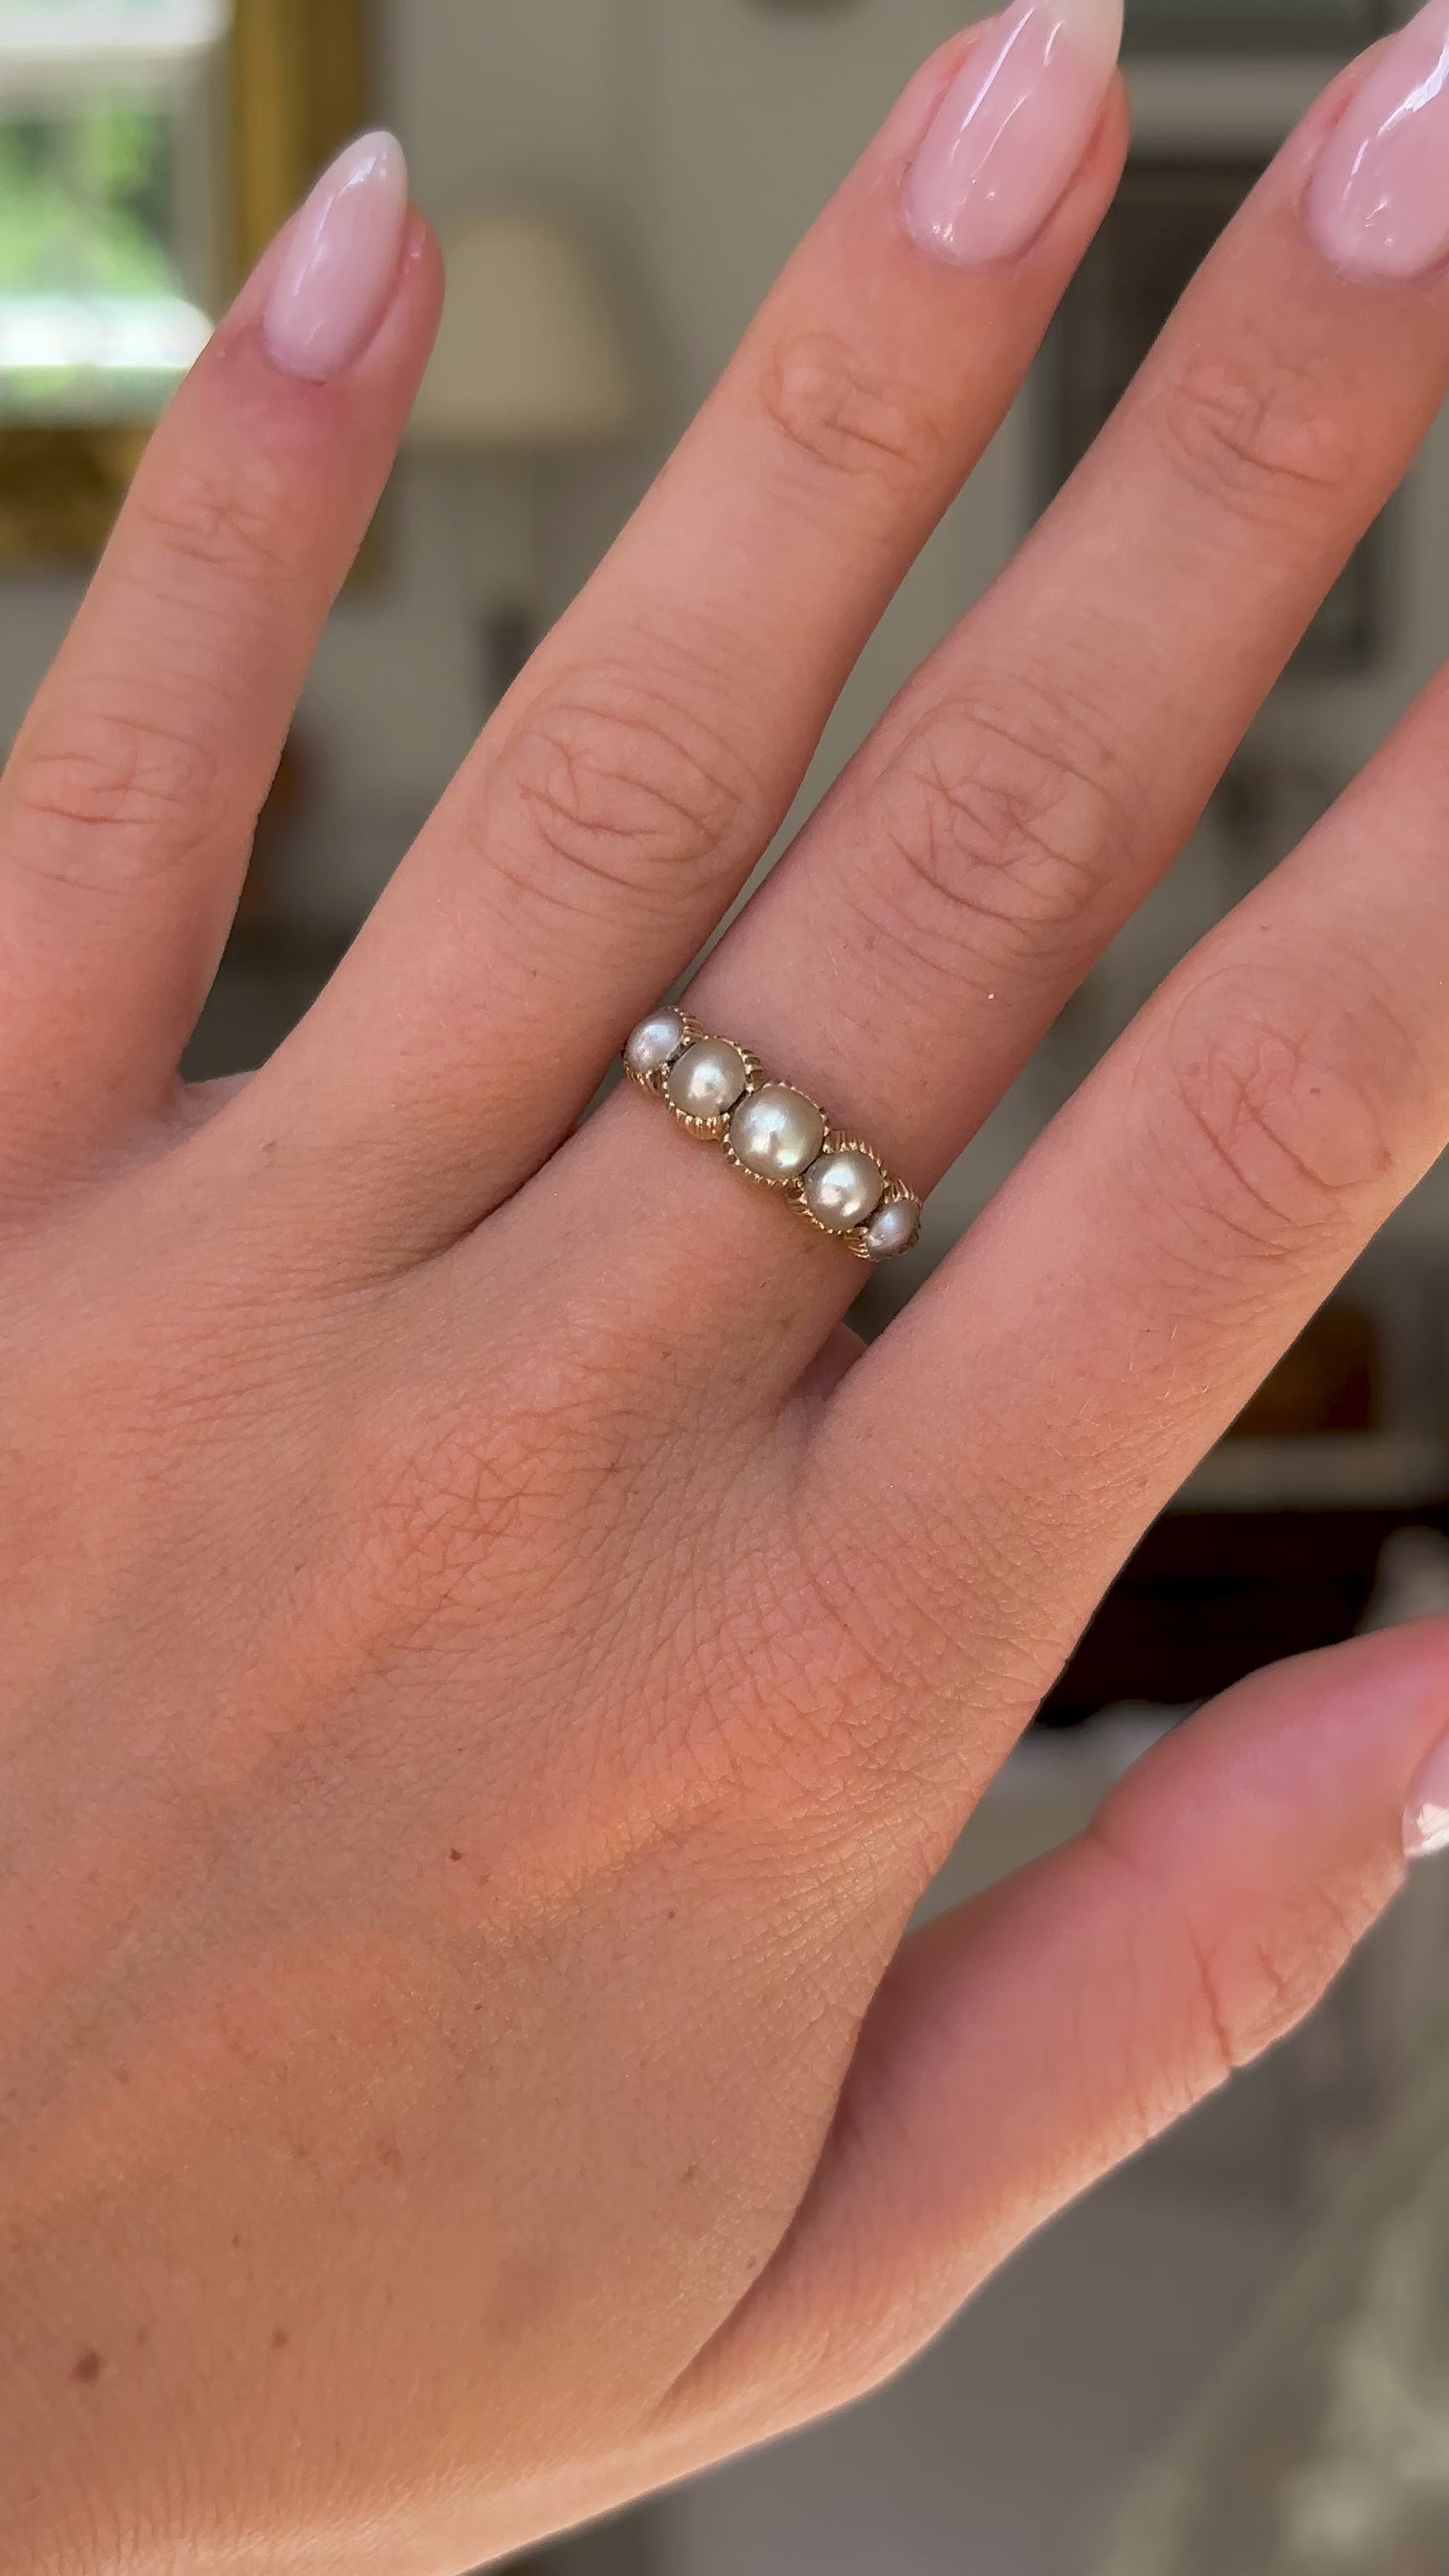 antique georgian pearl half hoop ring worn on hand and moved away from lens to give perspective, front view.